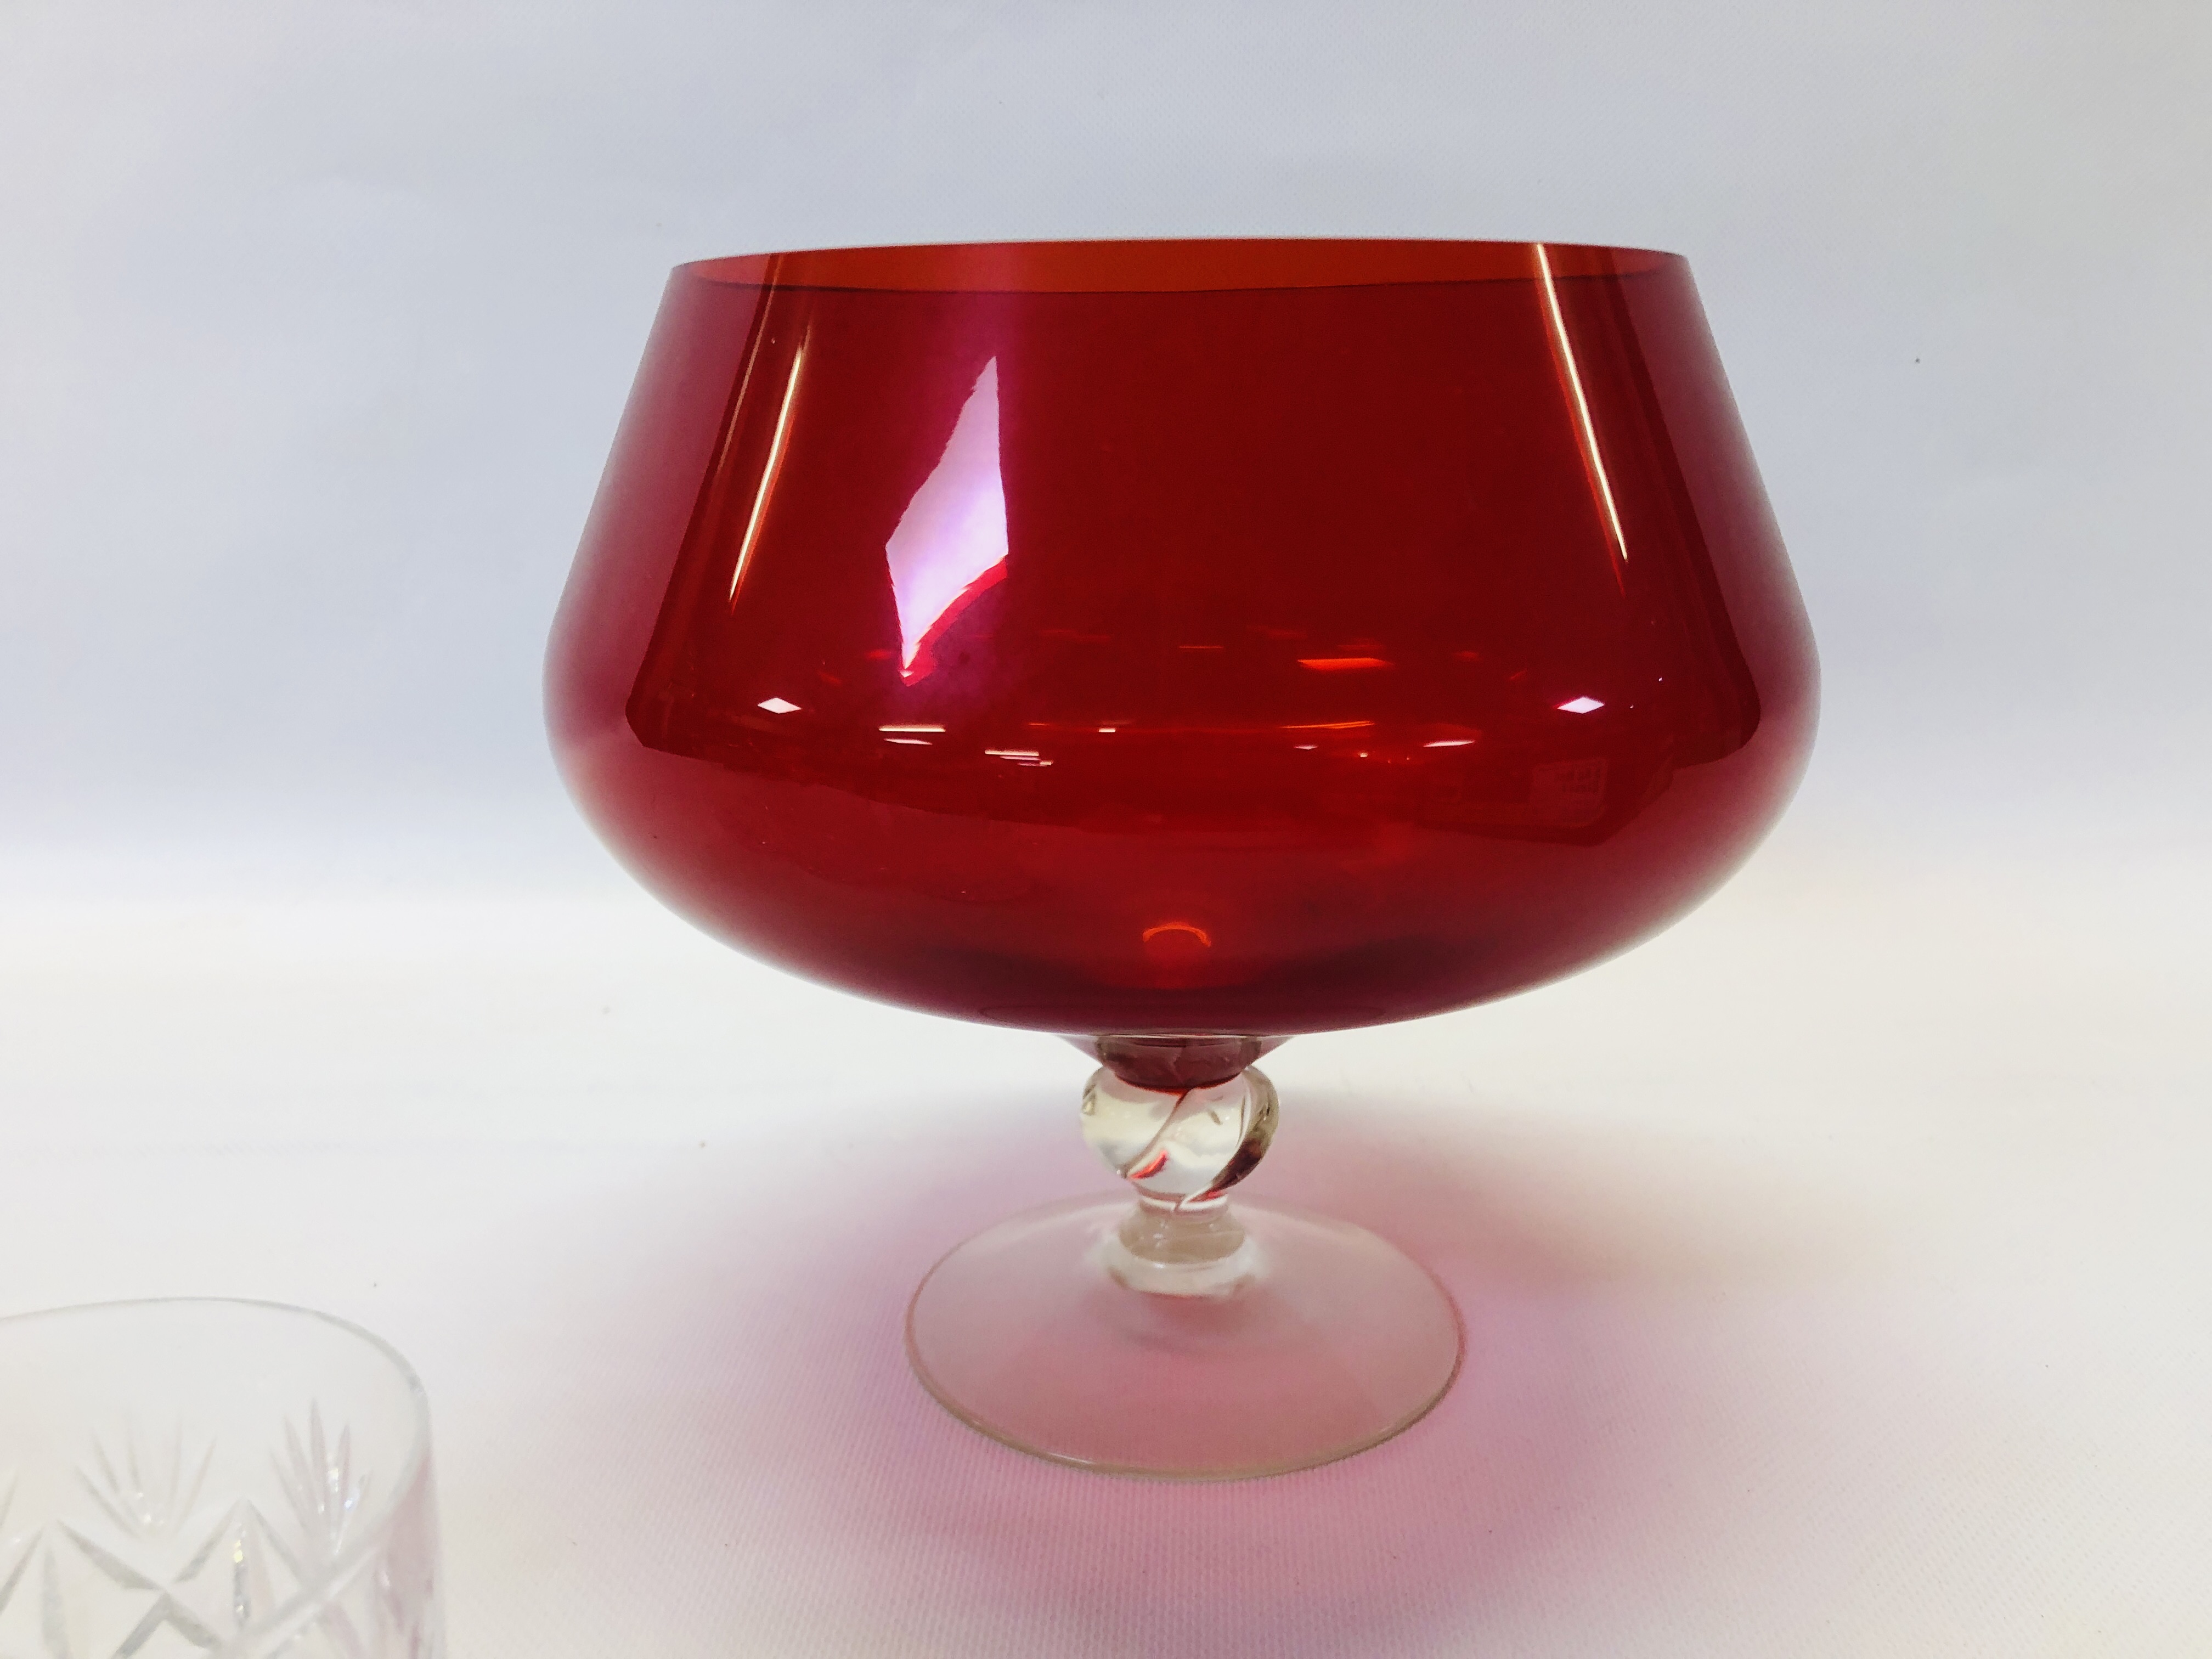 A LARGE ART GLASS PAPERWEIGHT H 12CM ALONG WITH A SET OF 6 CRYSTAL TUMBLERS + RED GLASS SINGLE - Image 3 of 5